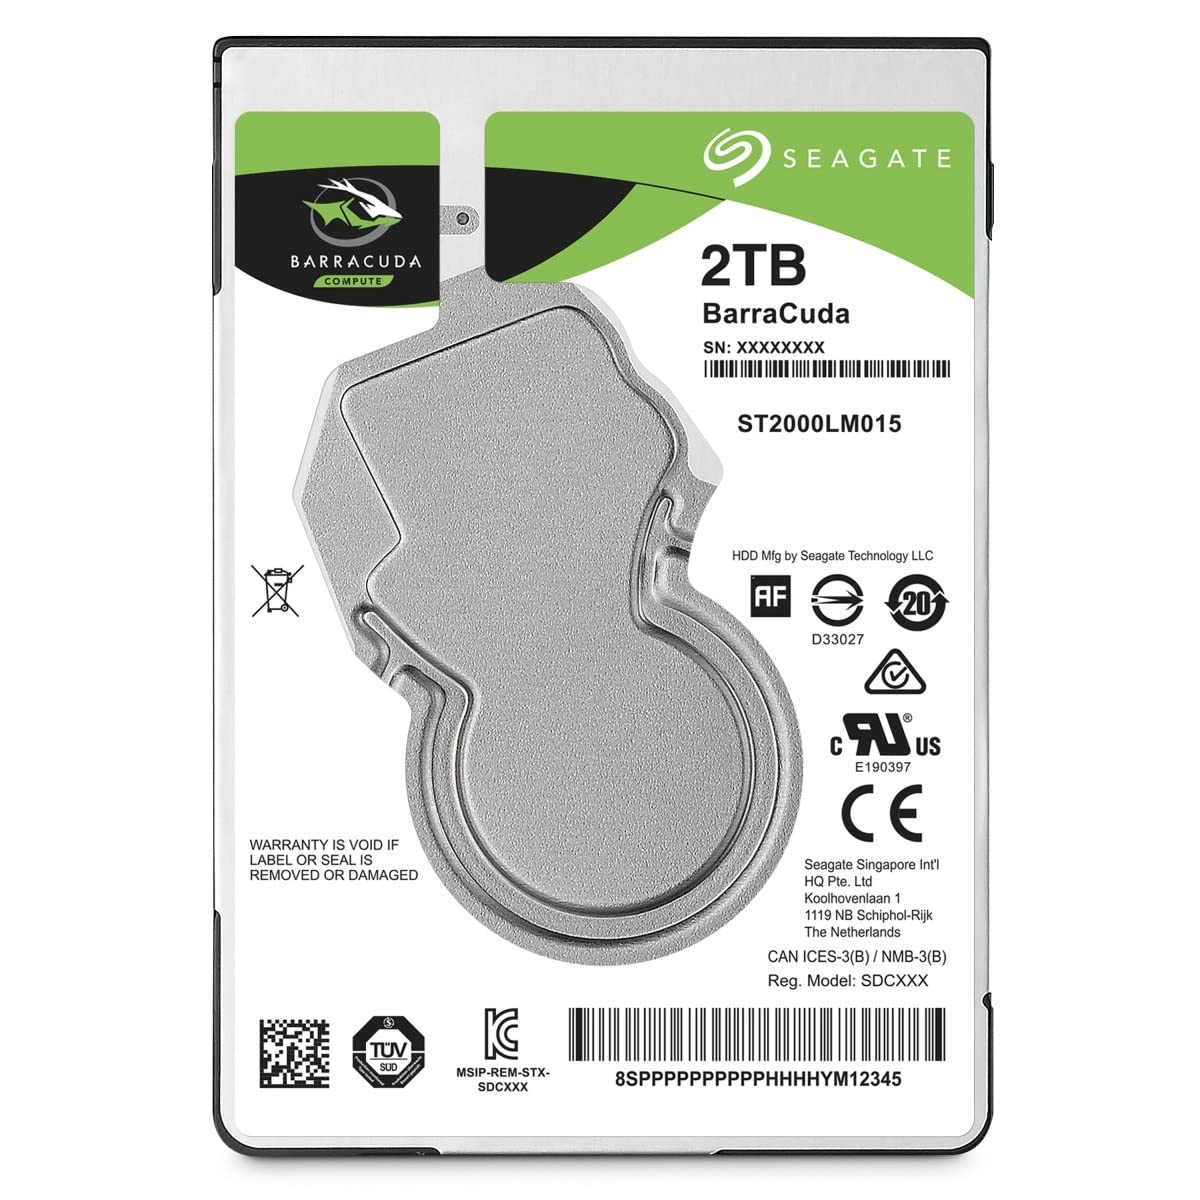 Barracuda 2 5in 2tb Sata Seagate Int Hdd Mobile St2000lm015 763649098318